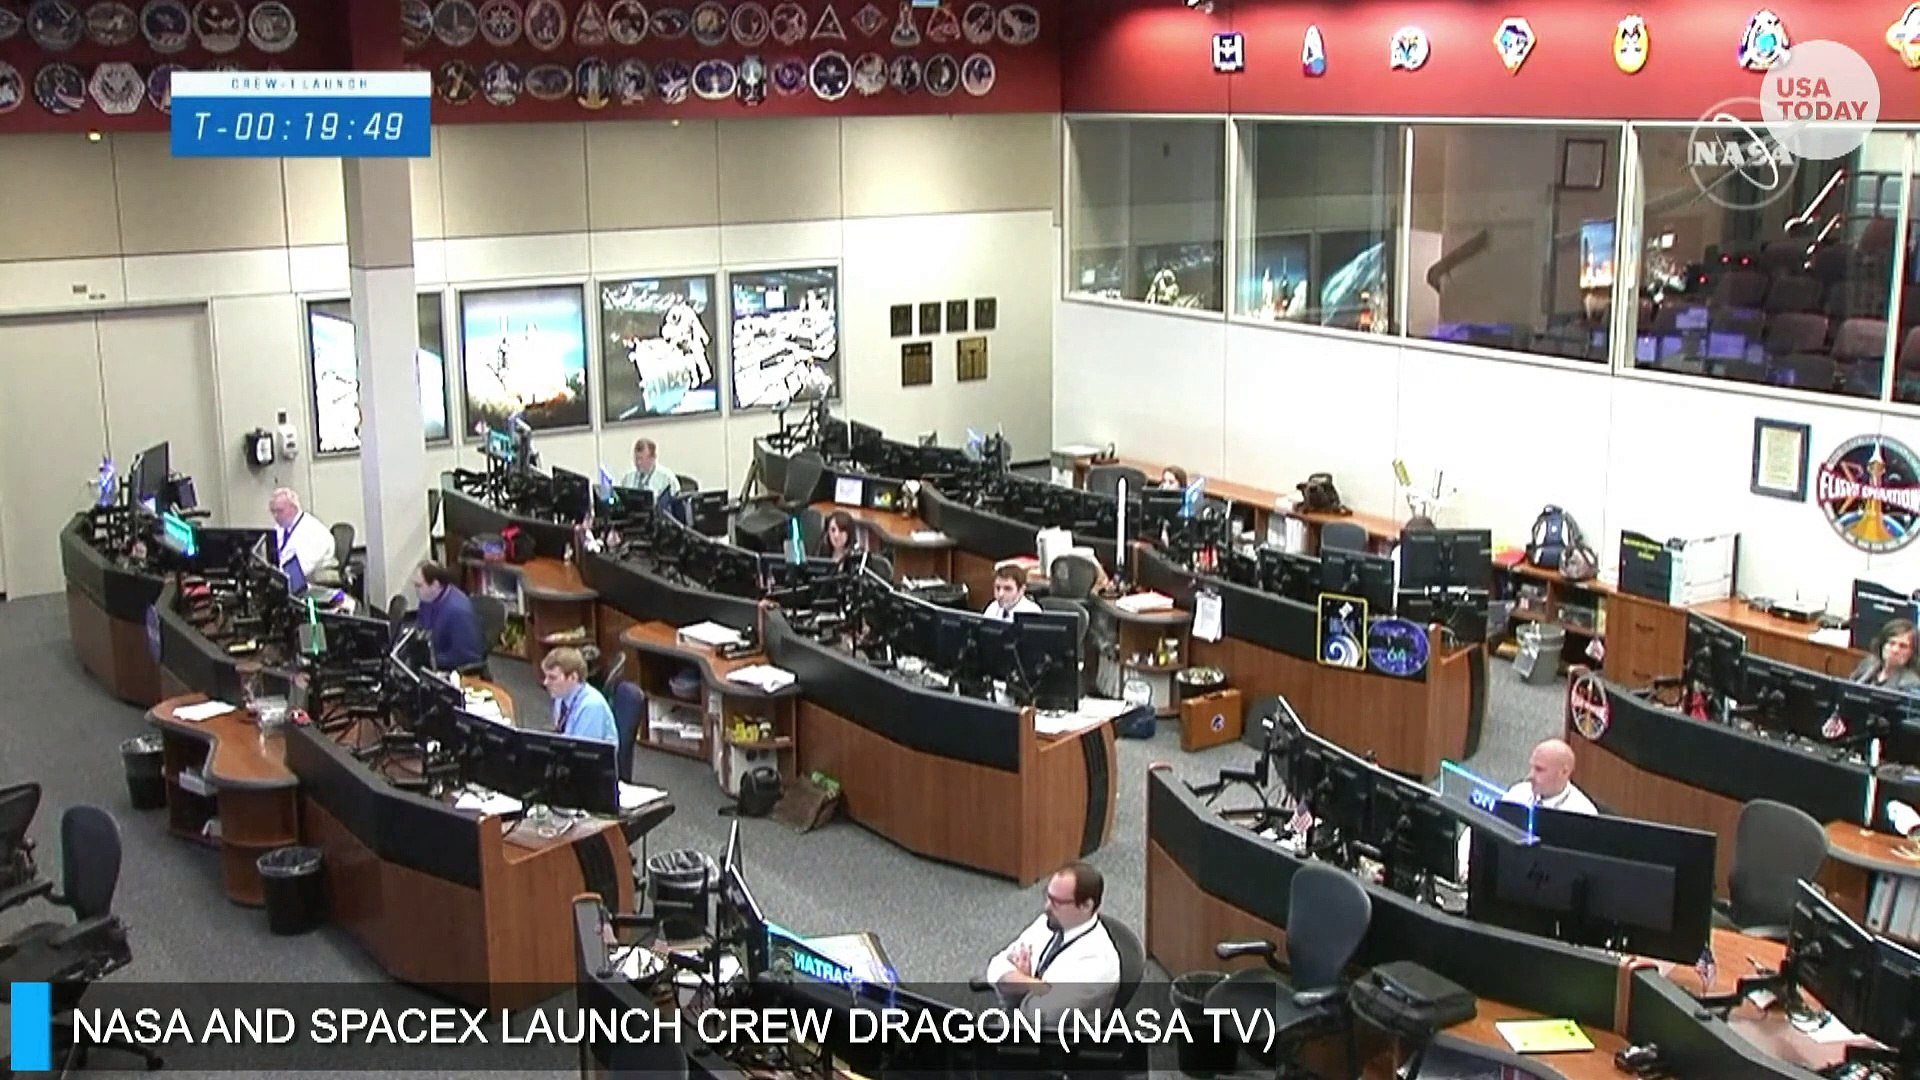 NASA AND SPACEX LAUNCH CREW DRAGON